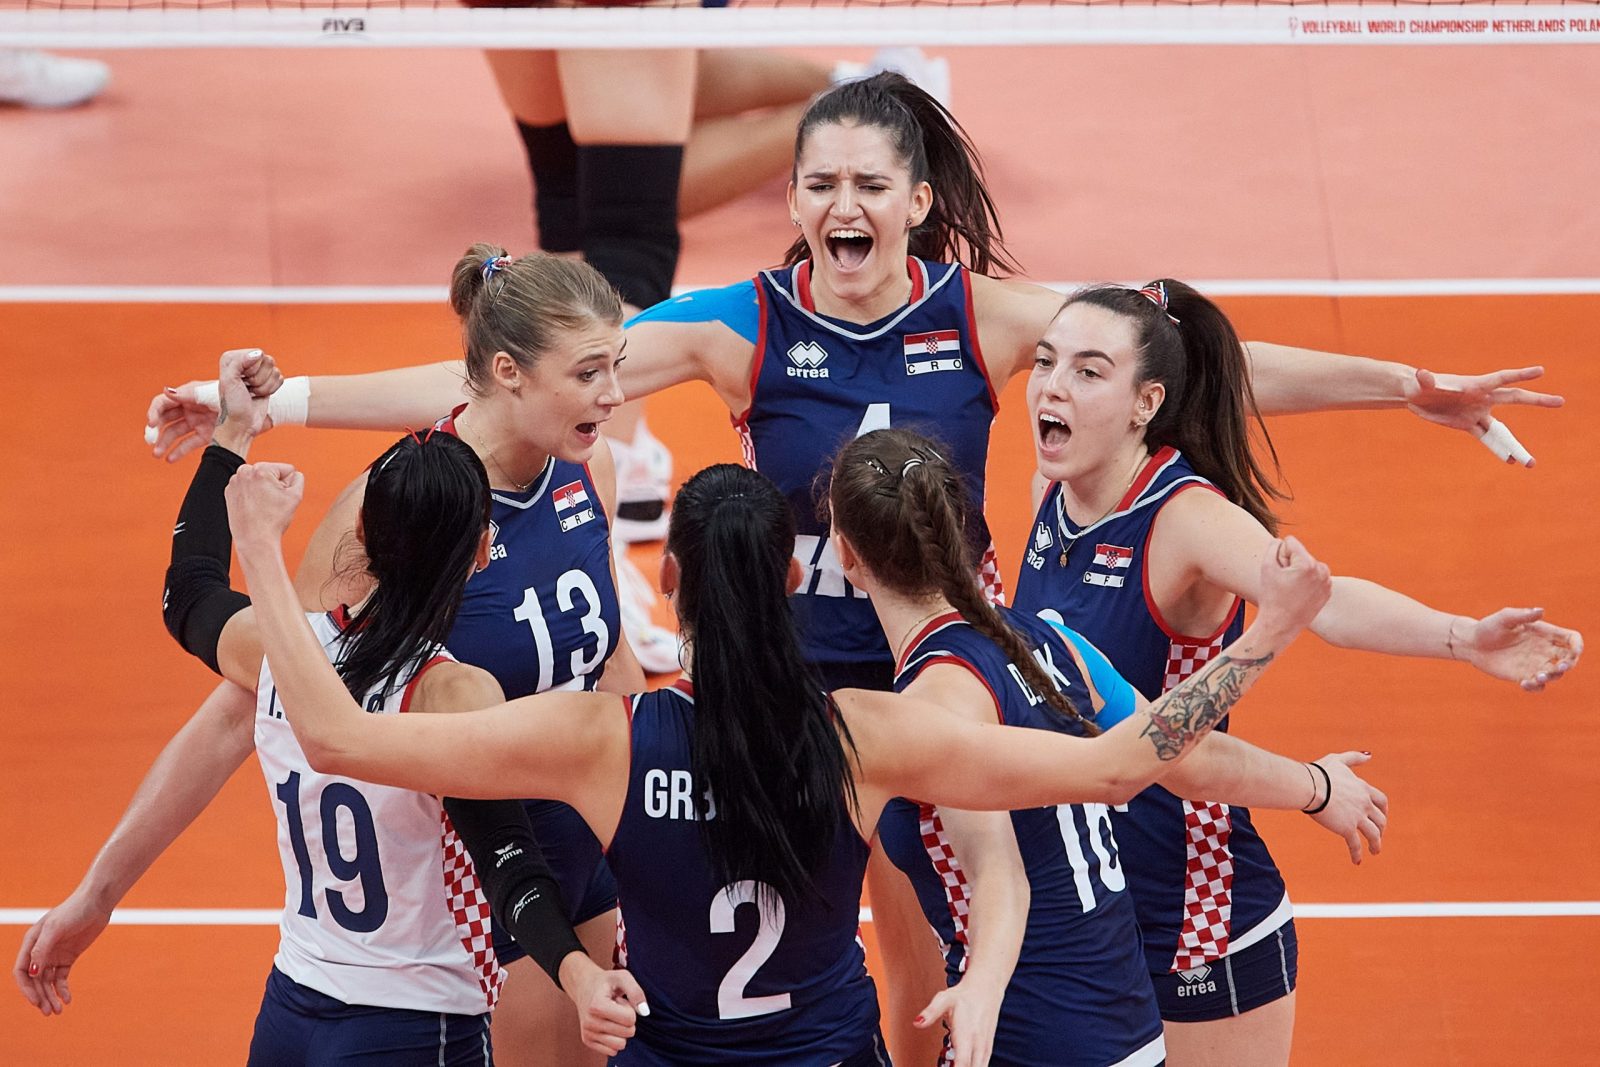 epa10211469 Croatian players celebrate a point during the 2022 Women's World Volleyball Championship match between Thailand and Croatia in Gdansk, Poland, 28 September 2022.  EPA/ADAM WARZAWA POLAND OUT